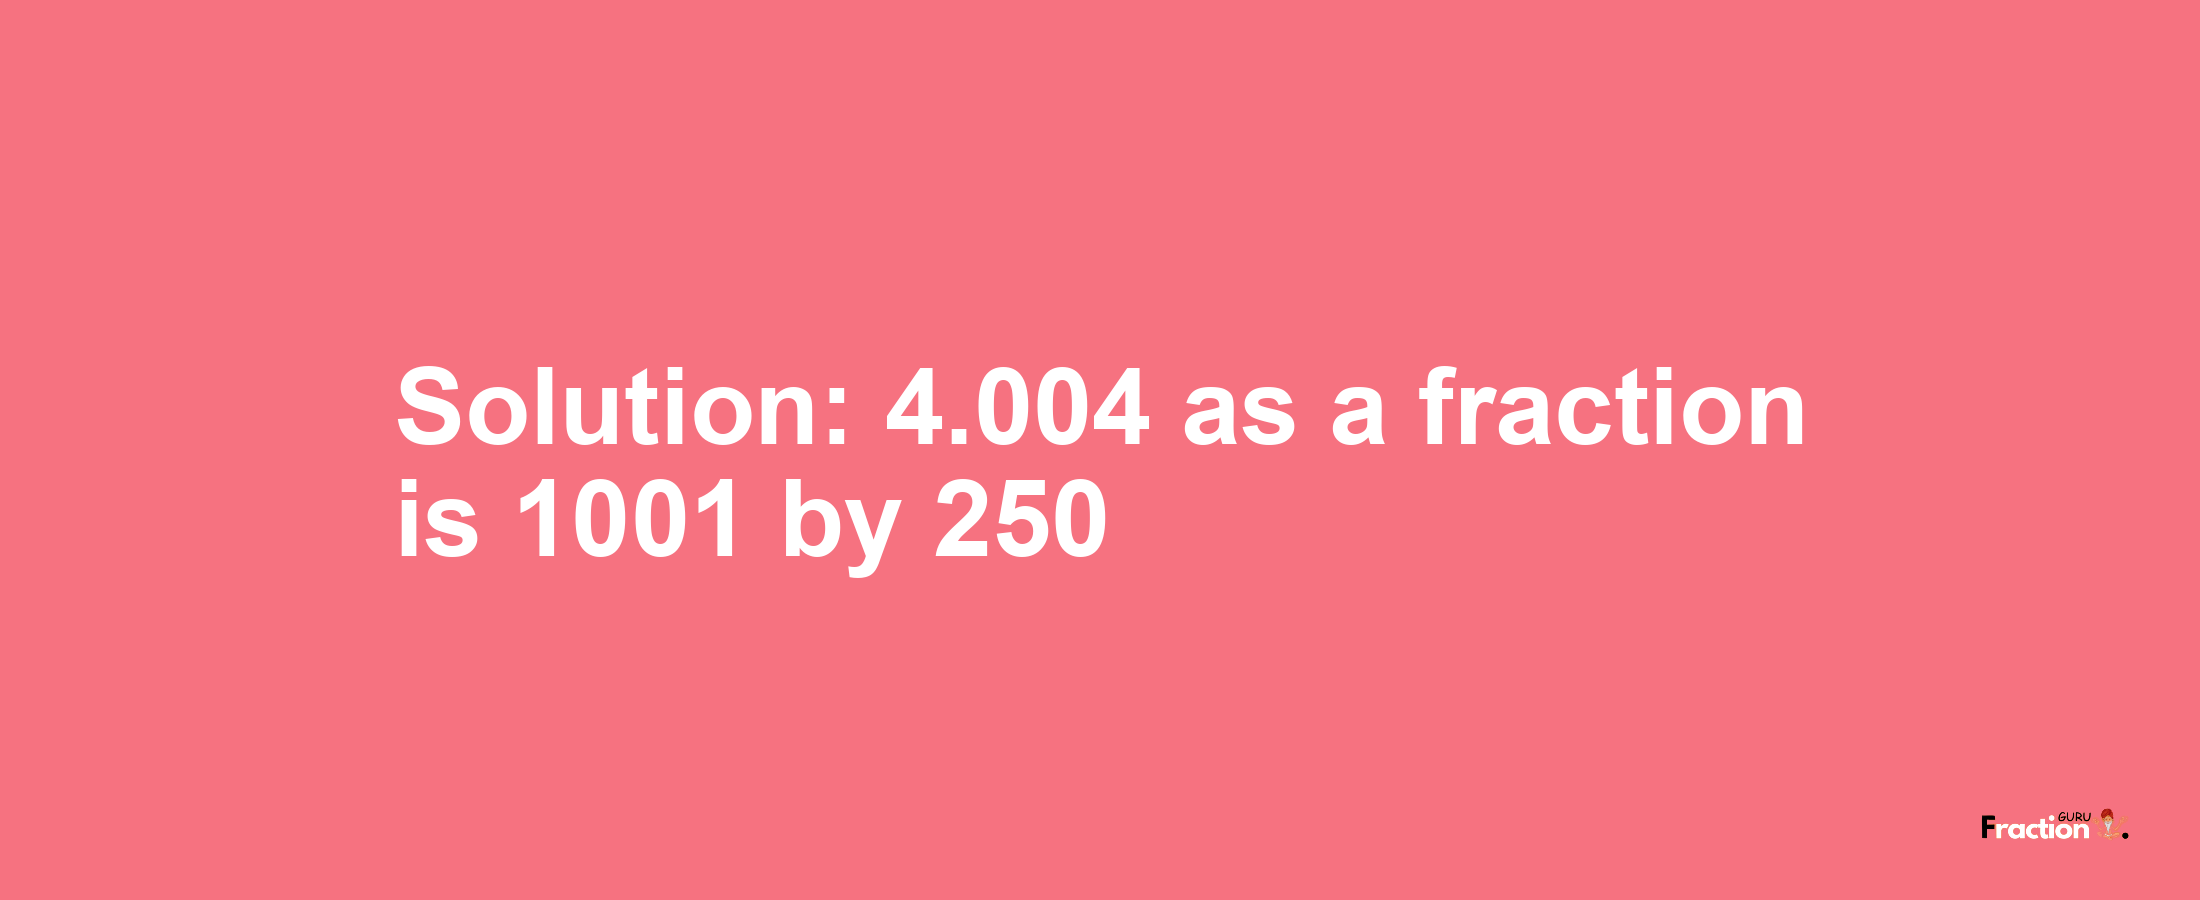 Solution:4.004 as a fraction is 1001/250